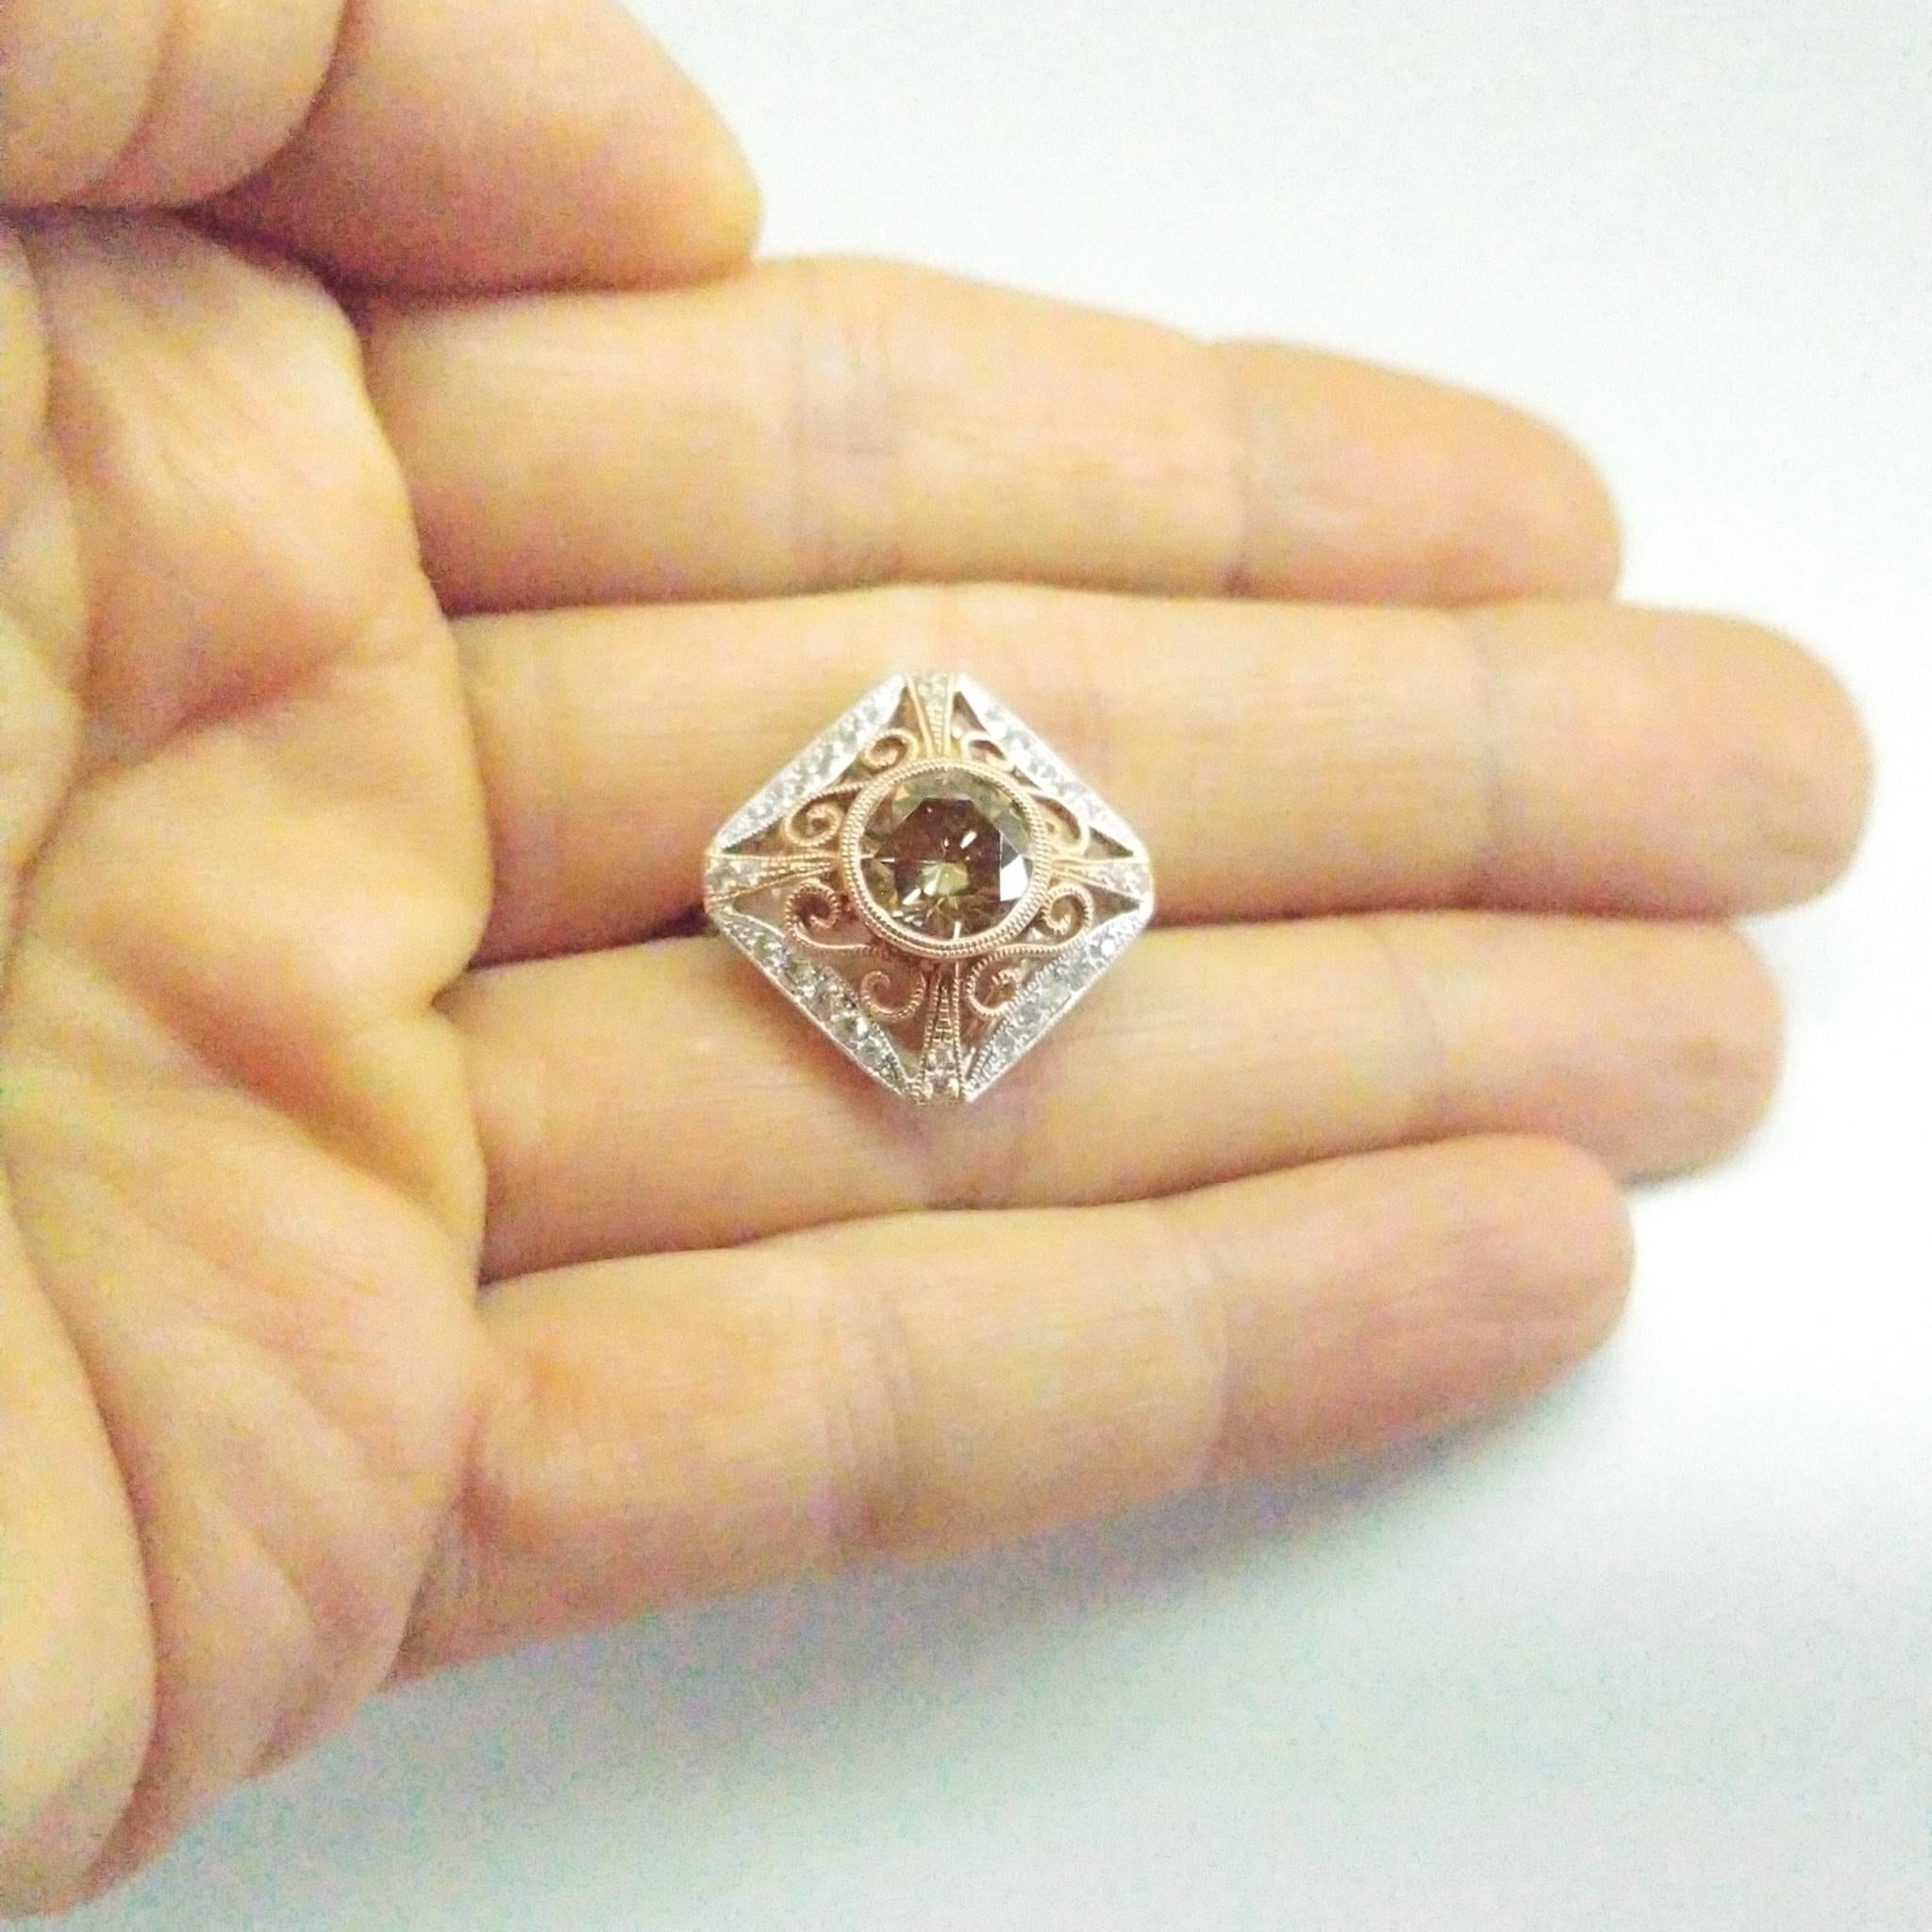 Natural Fancy Champagne Diamond Ring 2.26 Carat Filigree White and Rose Gold For Sale 6